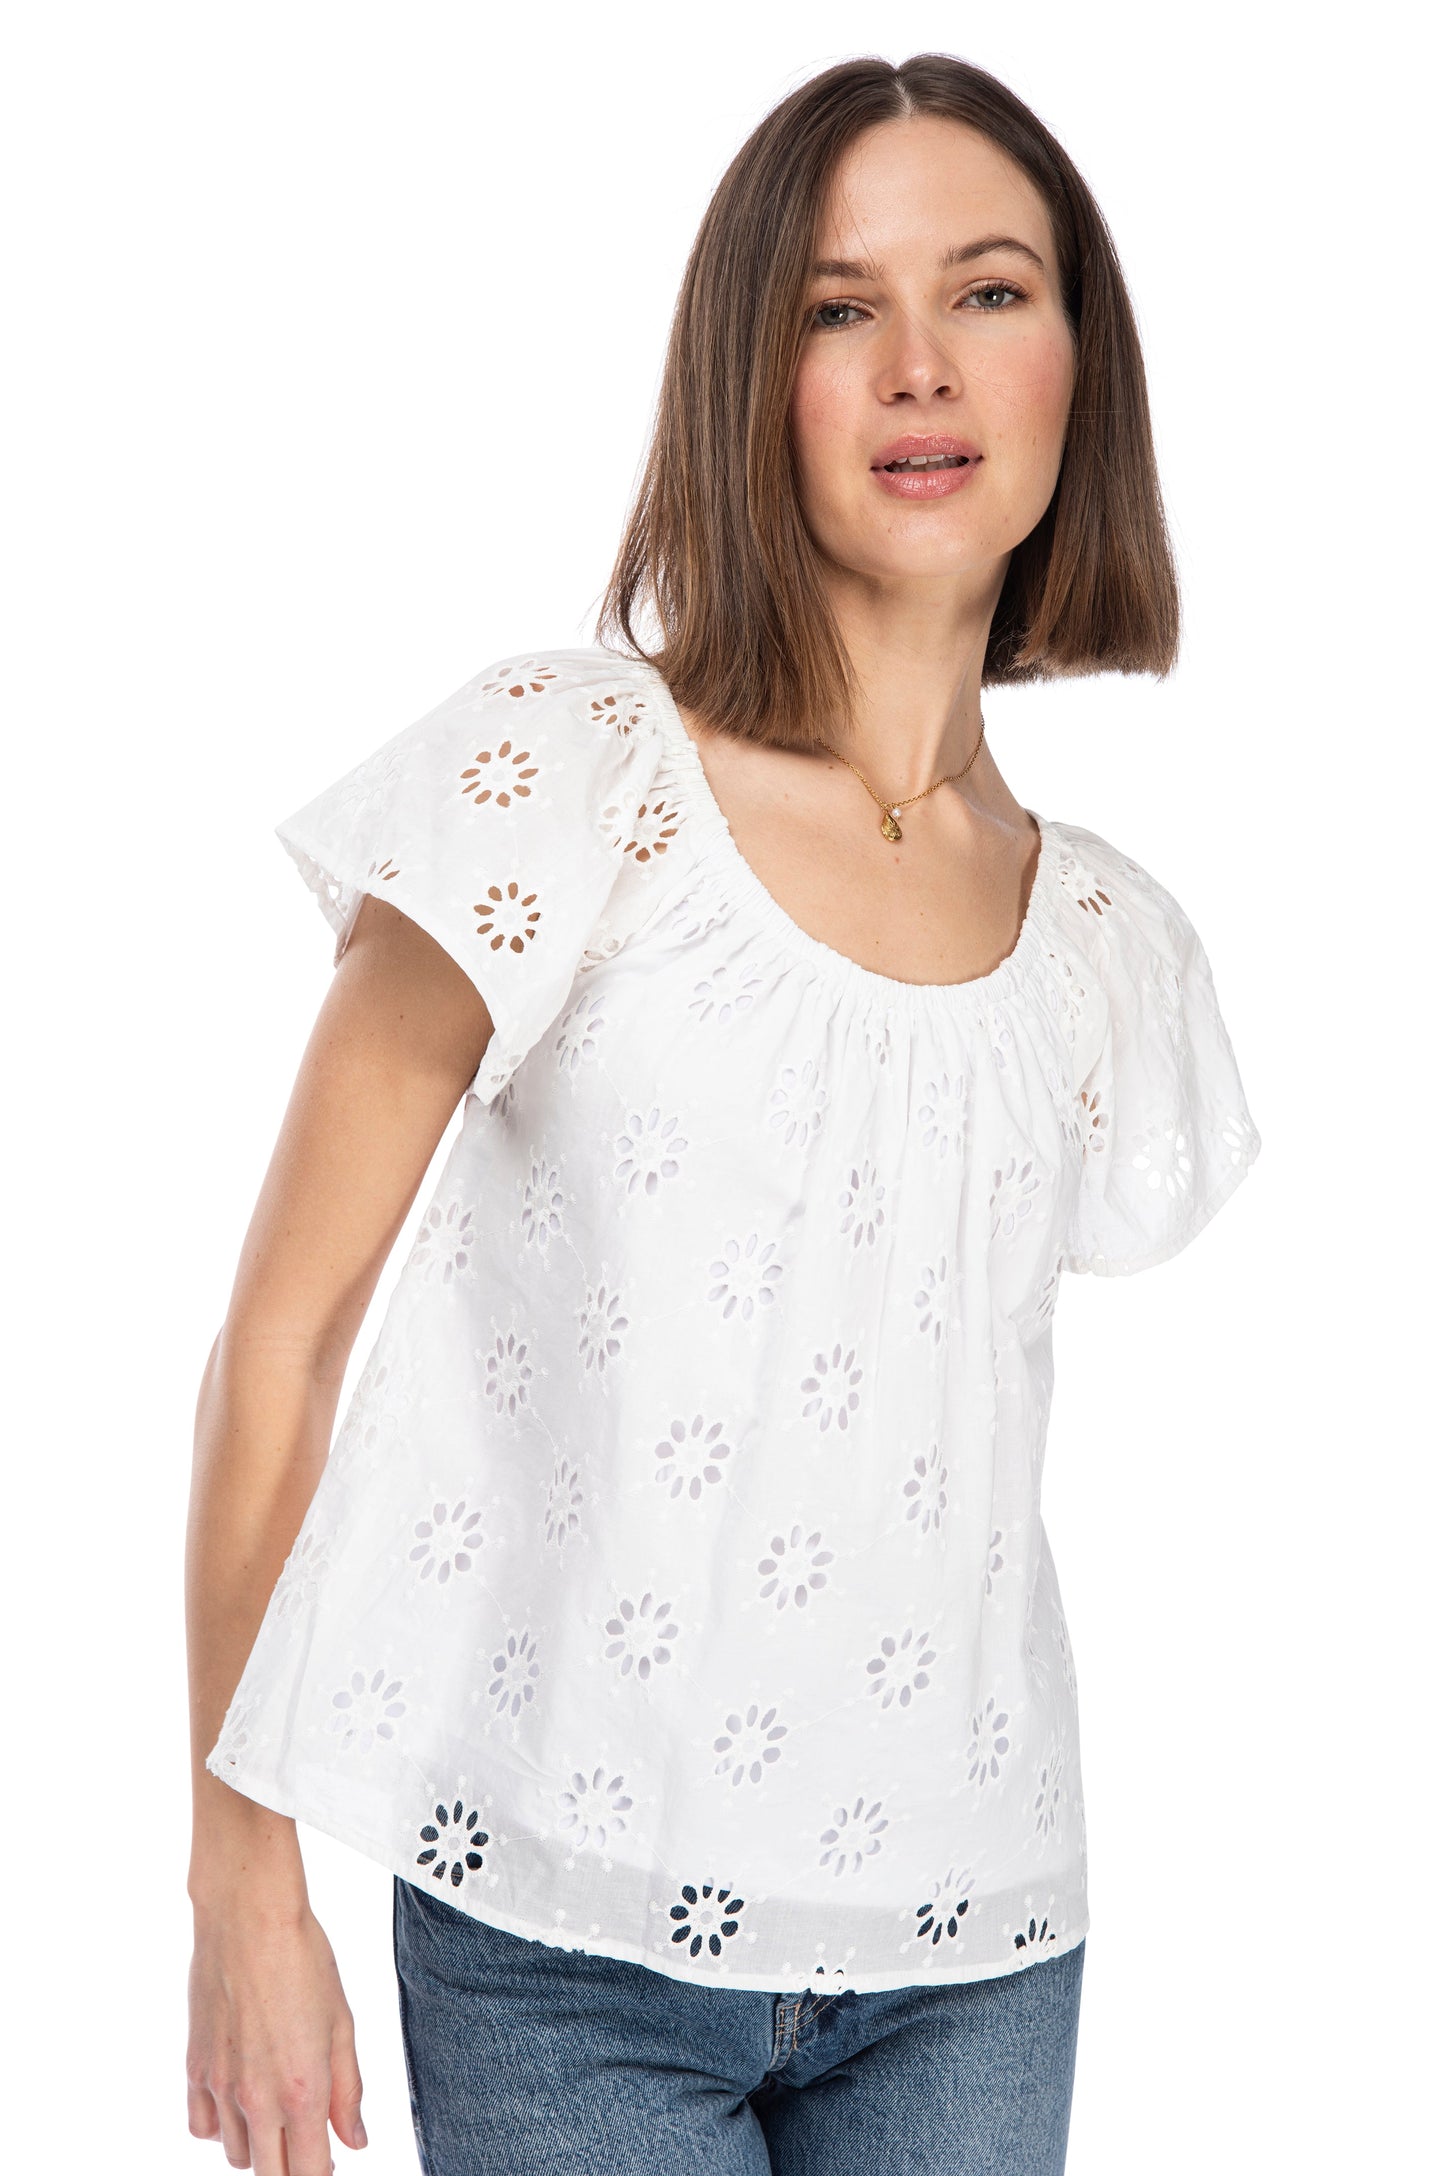 A woman wearing a B Collection by Bobeau SS PEASANT TOP, a 100% cotton, white blouse with floral cut-out patterns and an elastic neckline, looking directly at the camera with a neutral expression.